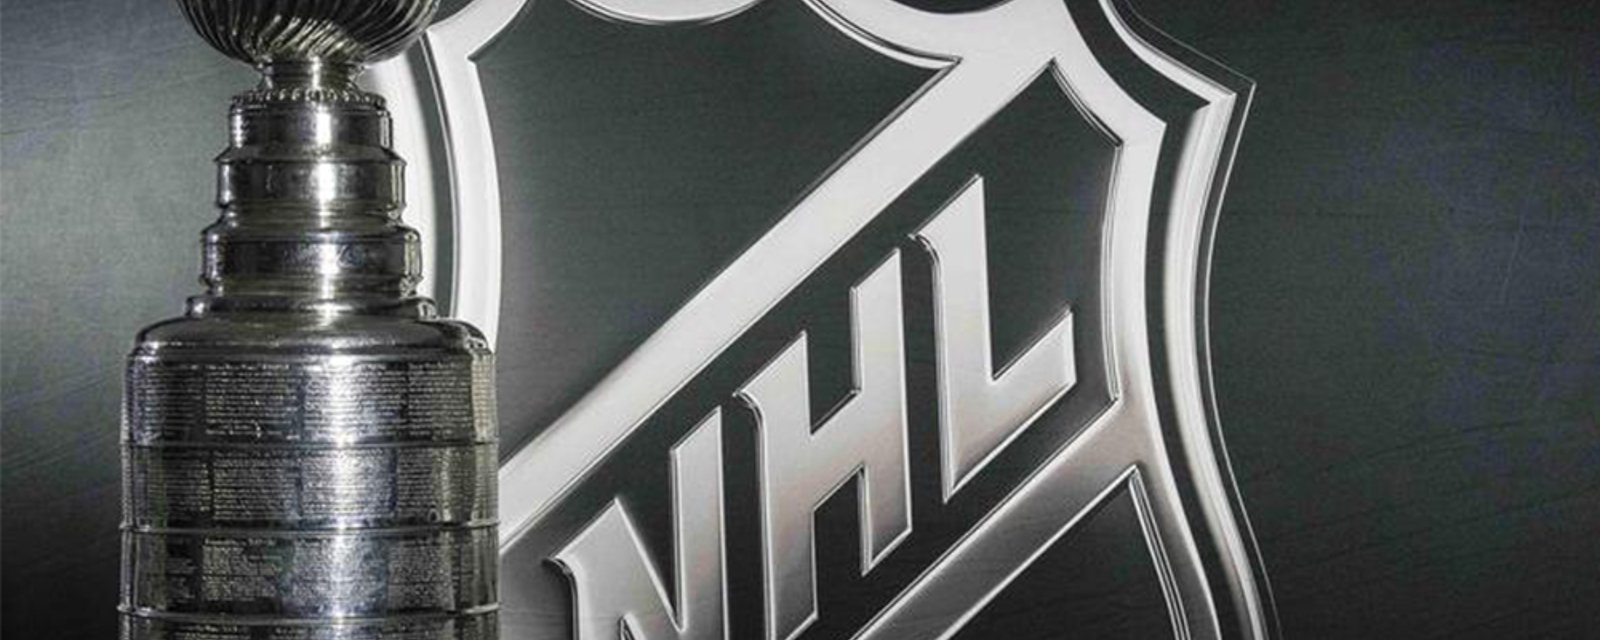 Rumor: The NHL's expanded playoff format could extend beyond this season.